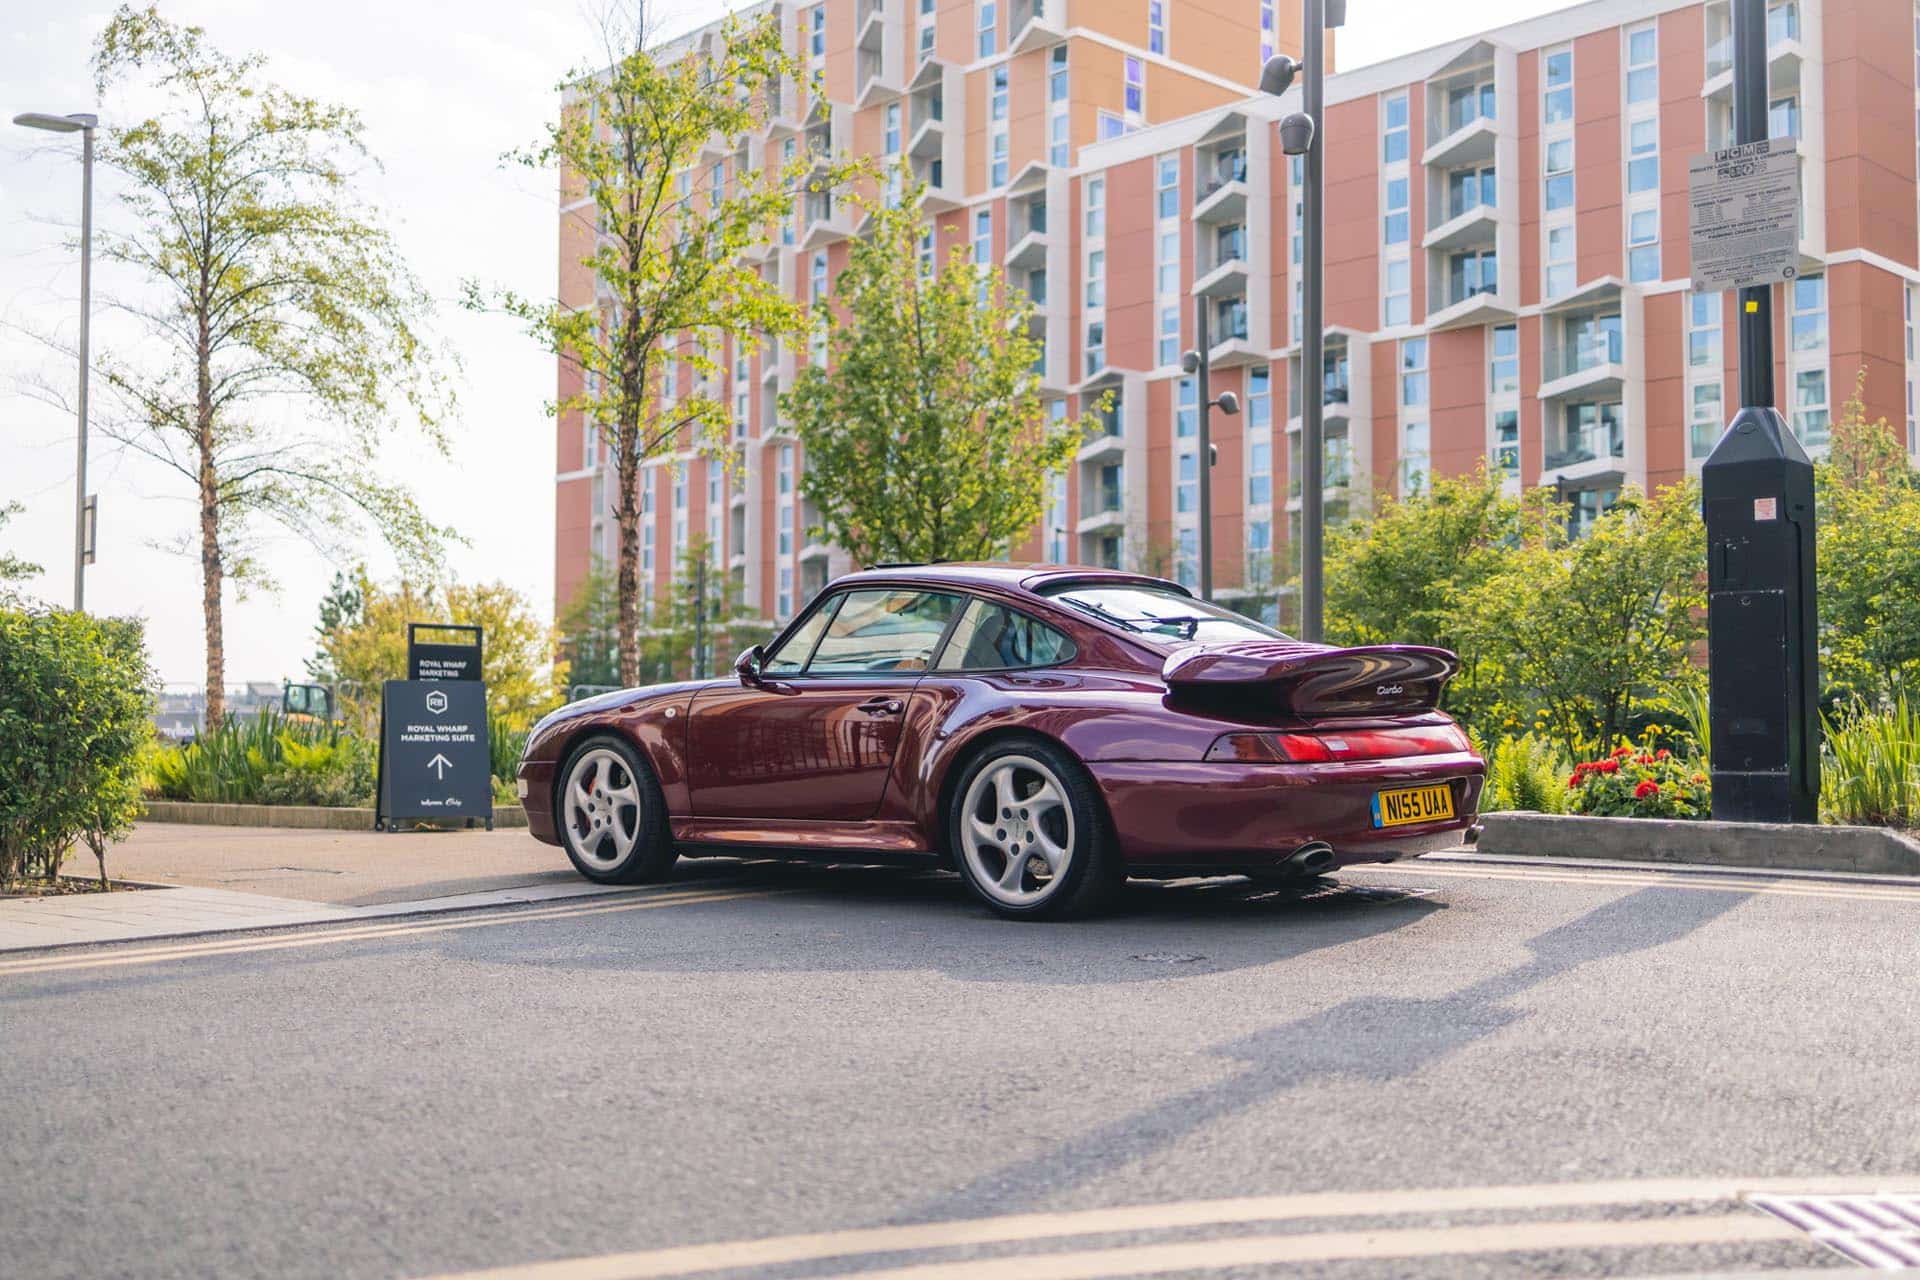 993 turbo parked outside